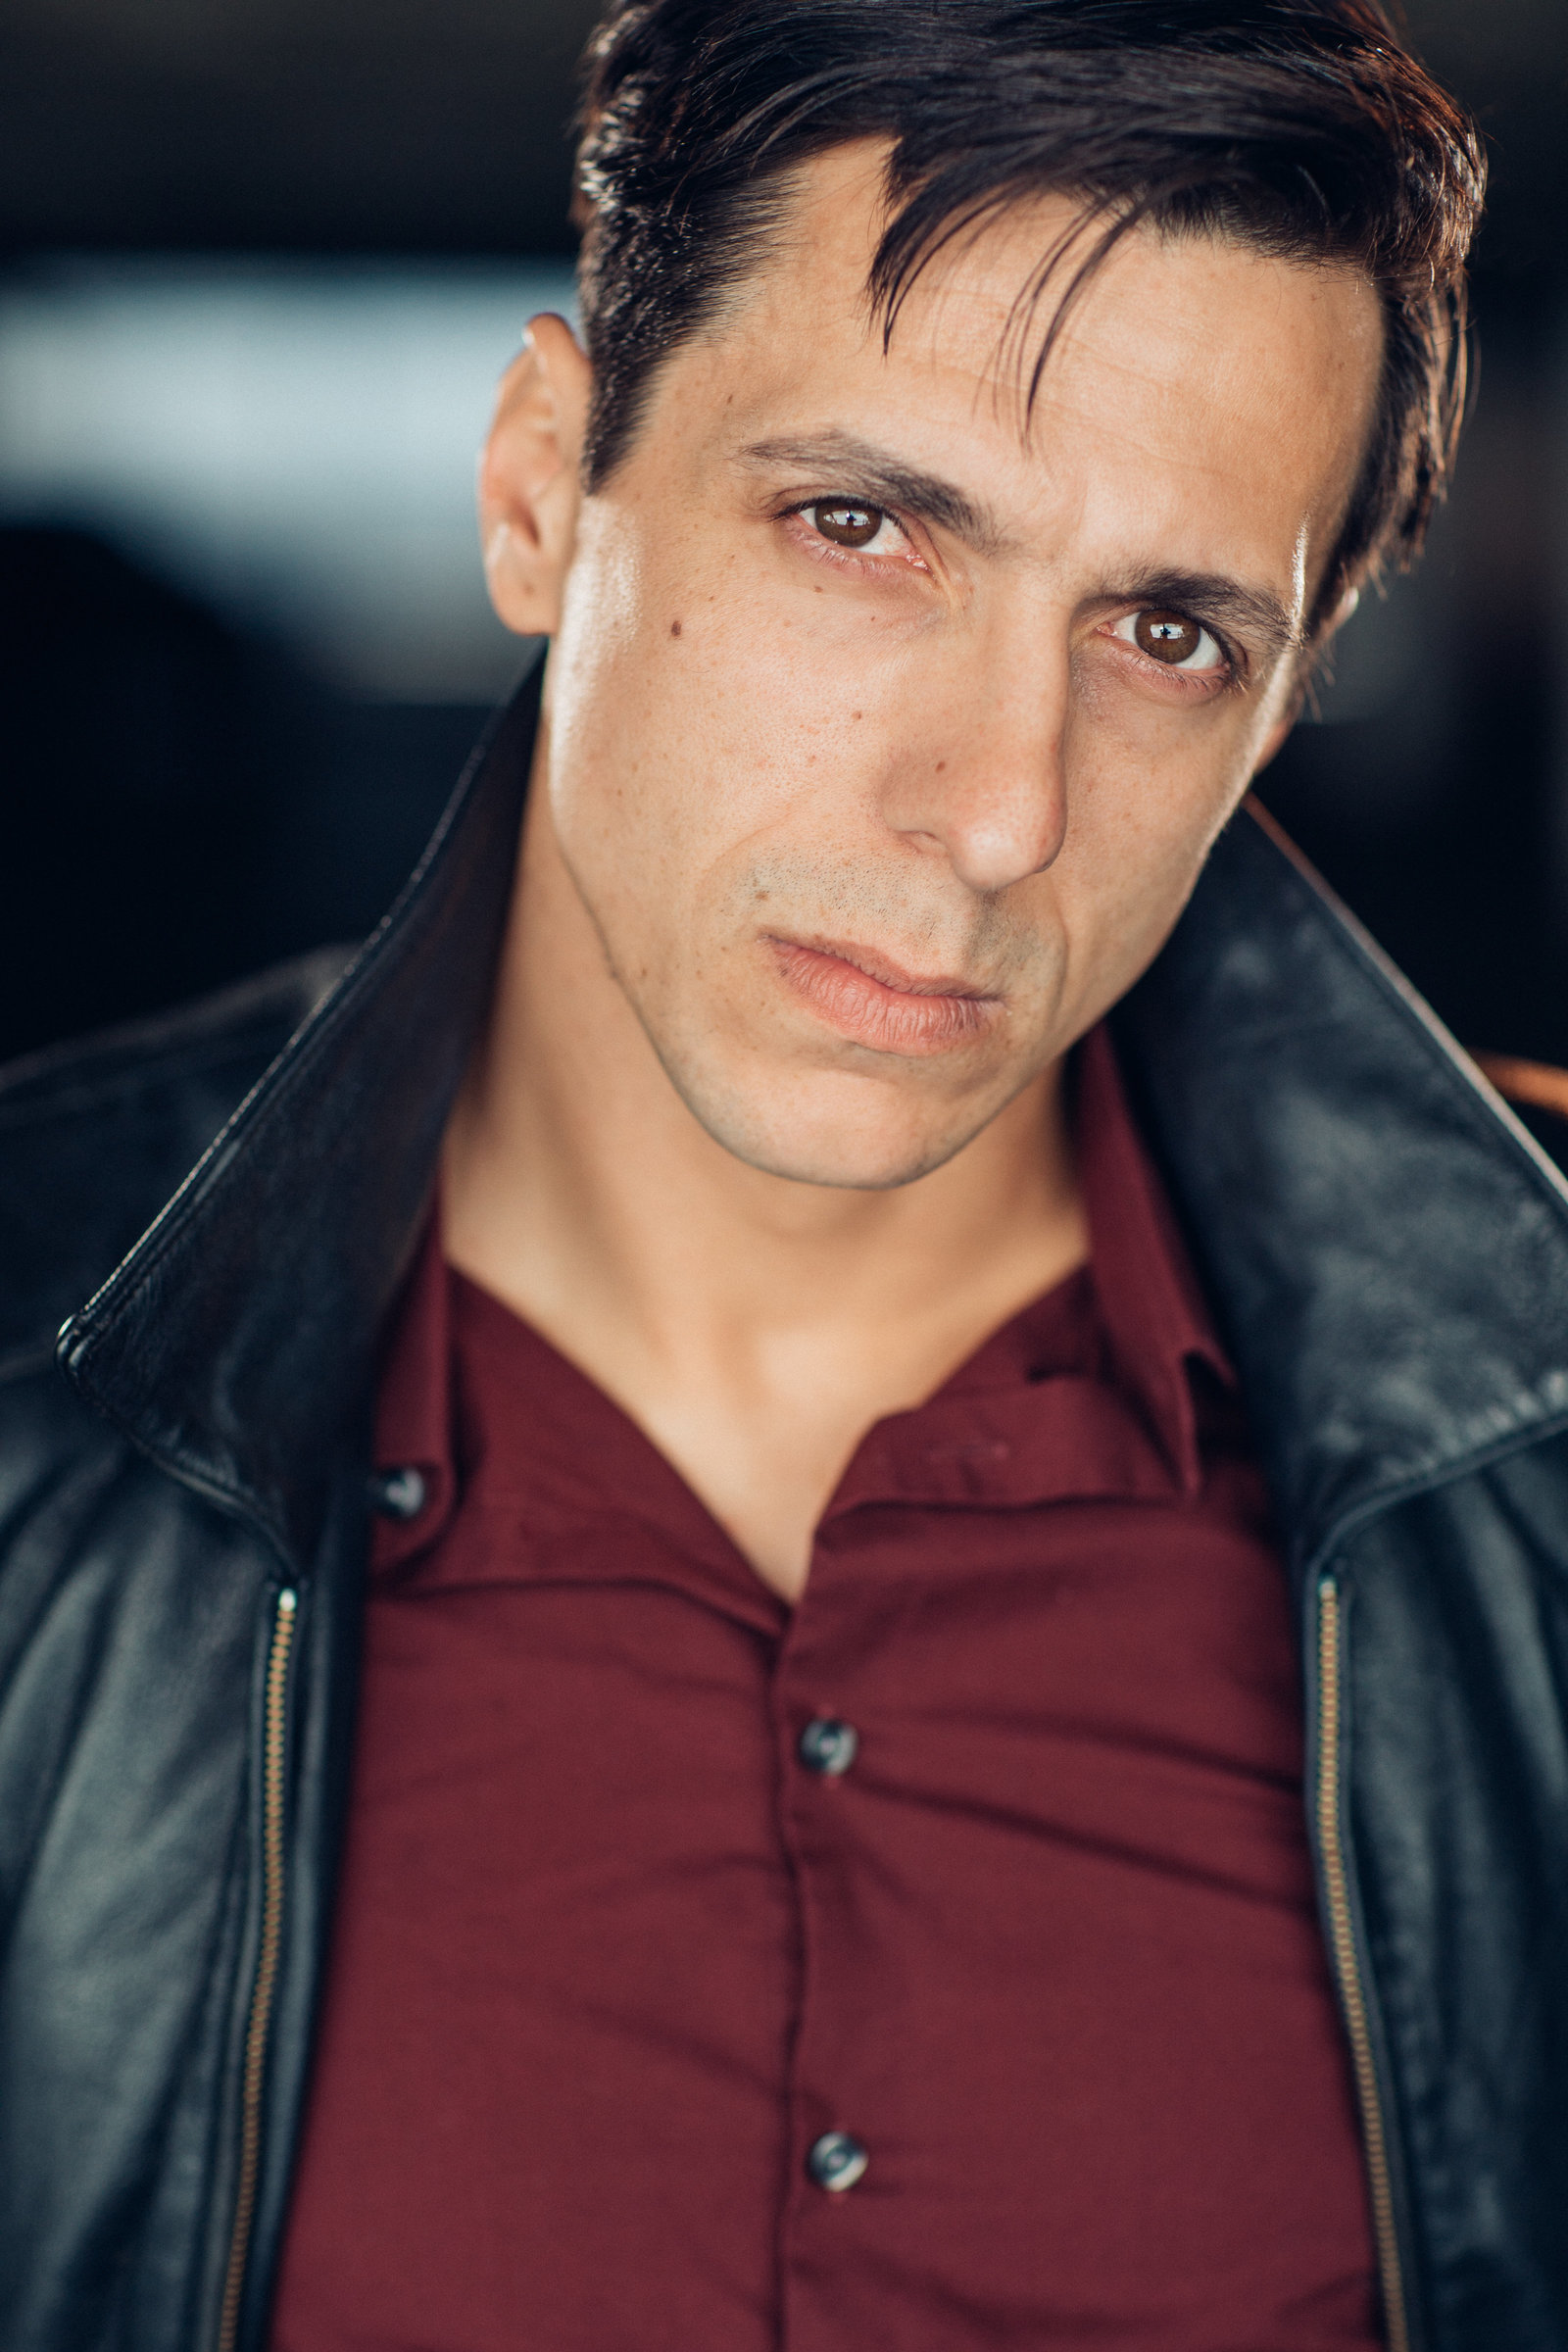 Headshot Photo Of Man In Black Leather Jacket And Maroon Polo